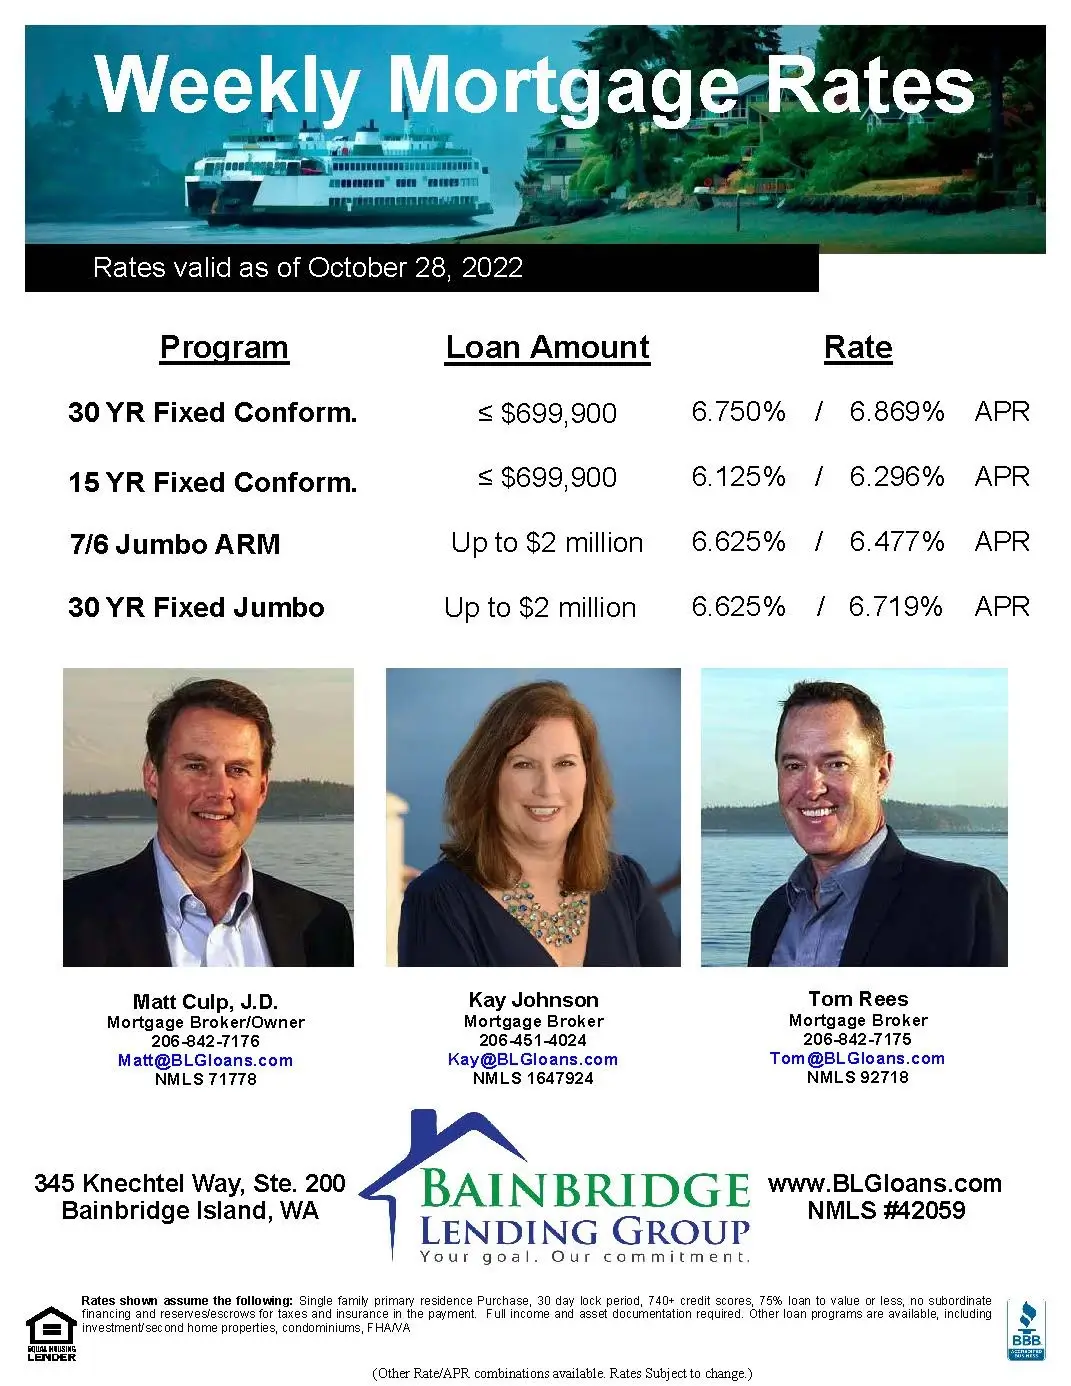 Weekly Rate Update for October 28, 2022